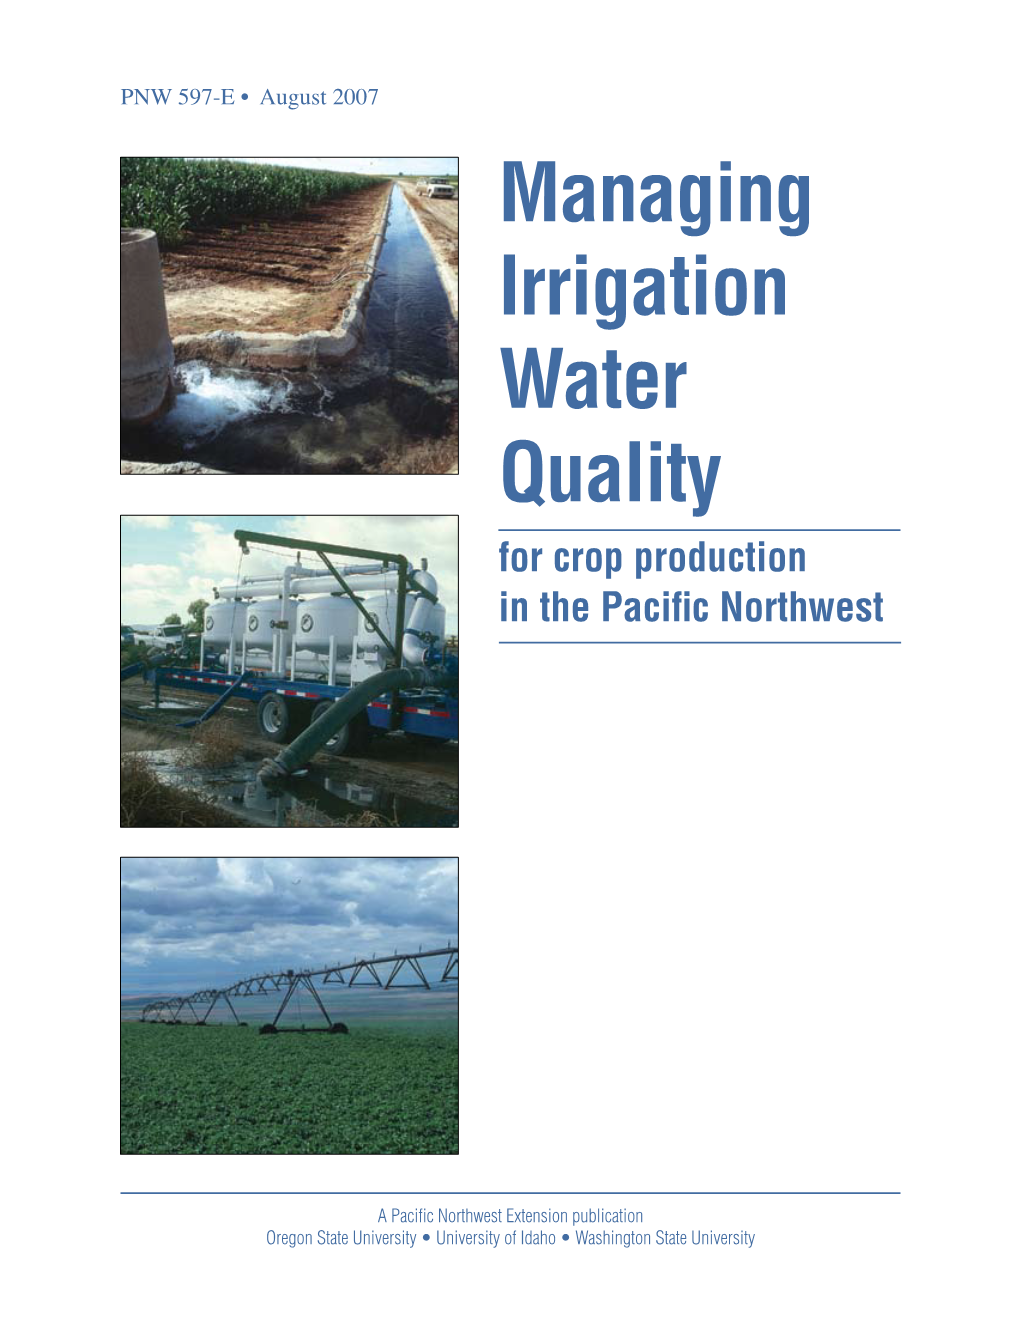 Managing Irrigation Water Quality for Crop Production in the Pacific Northwest